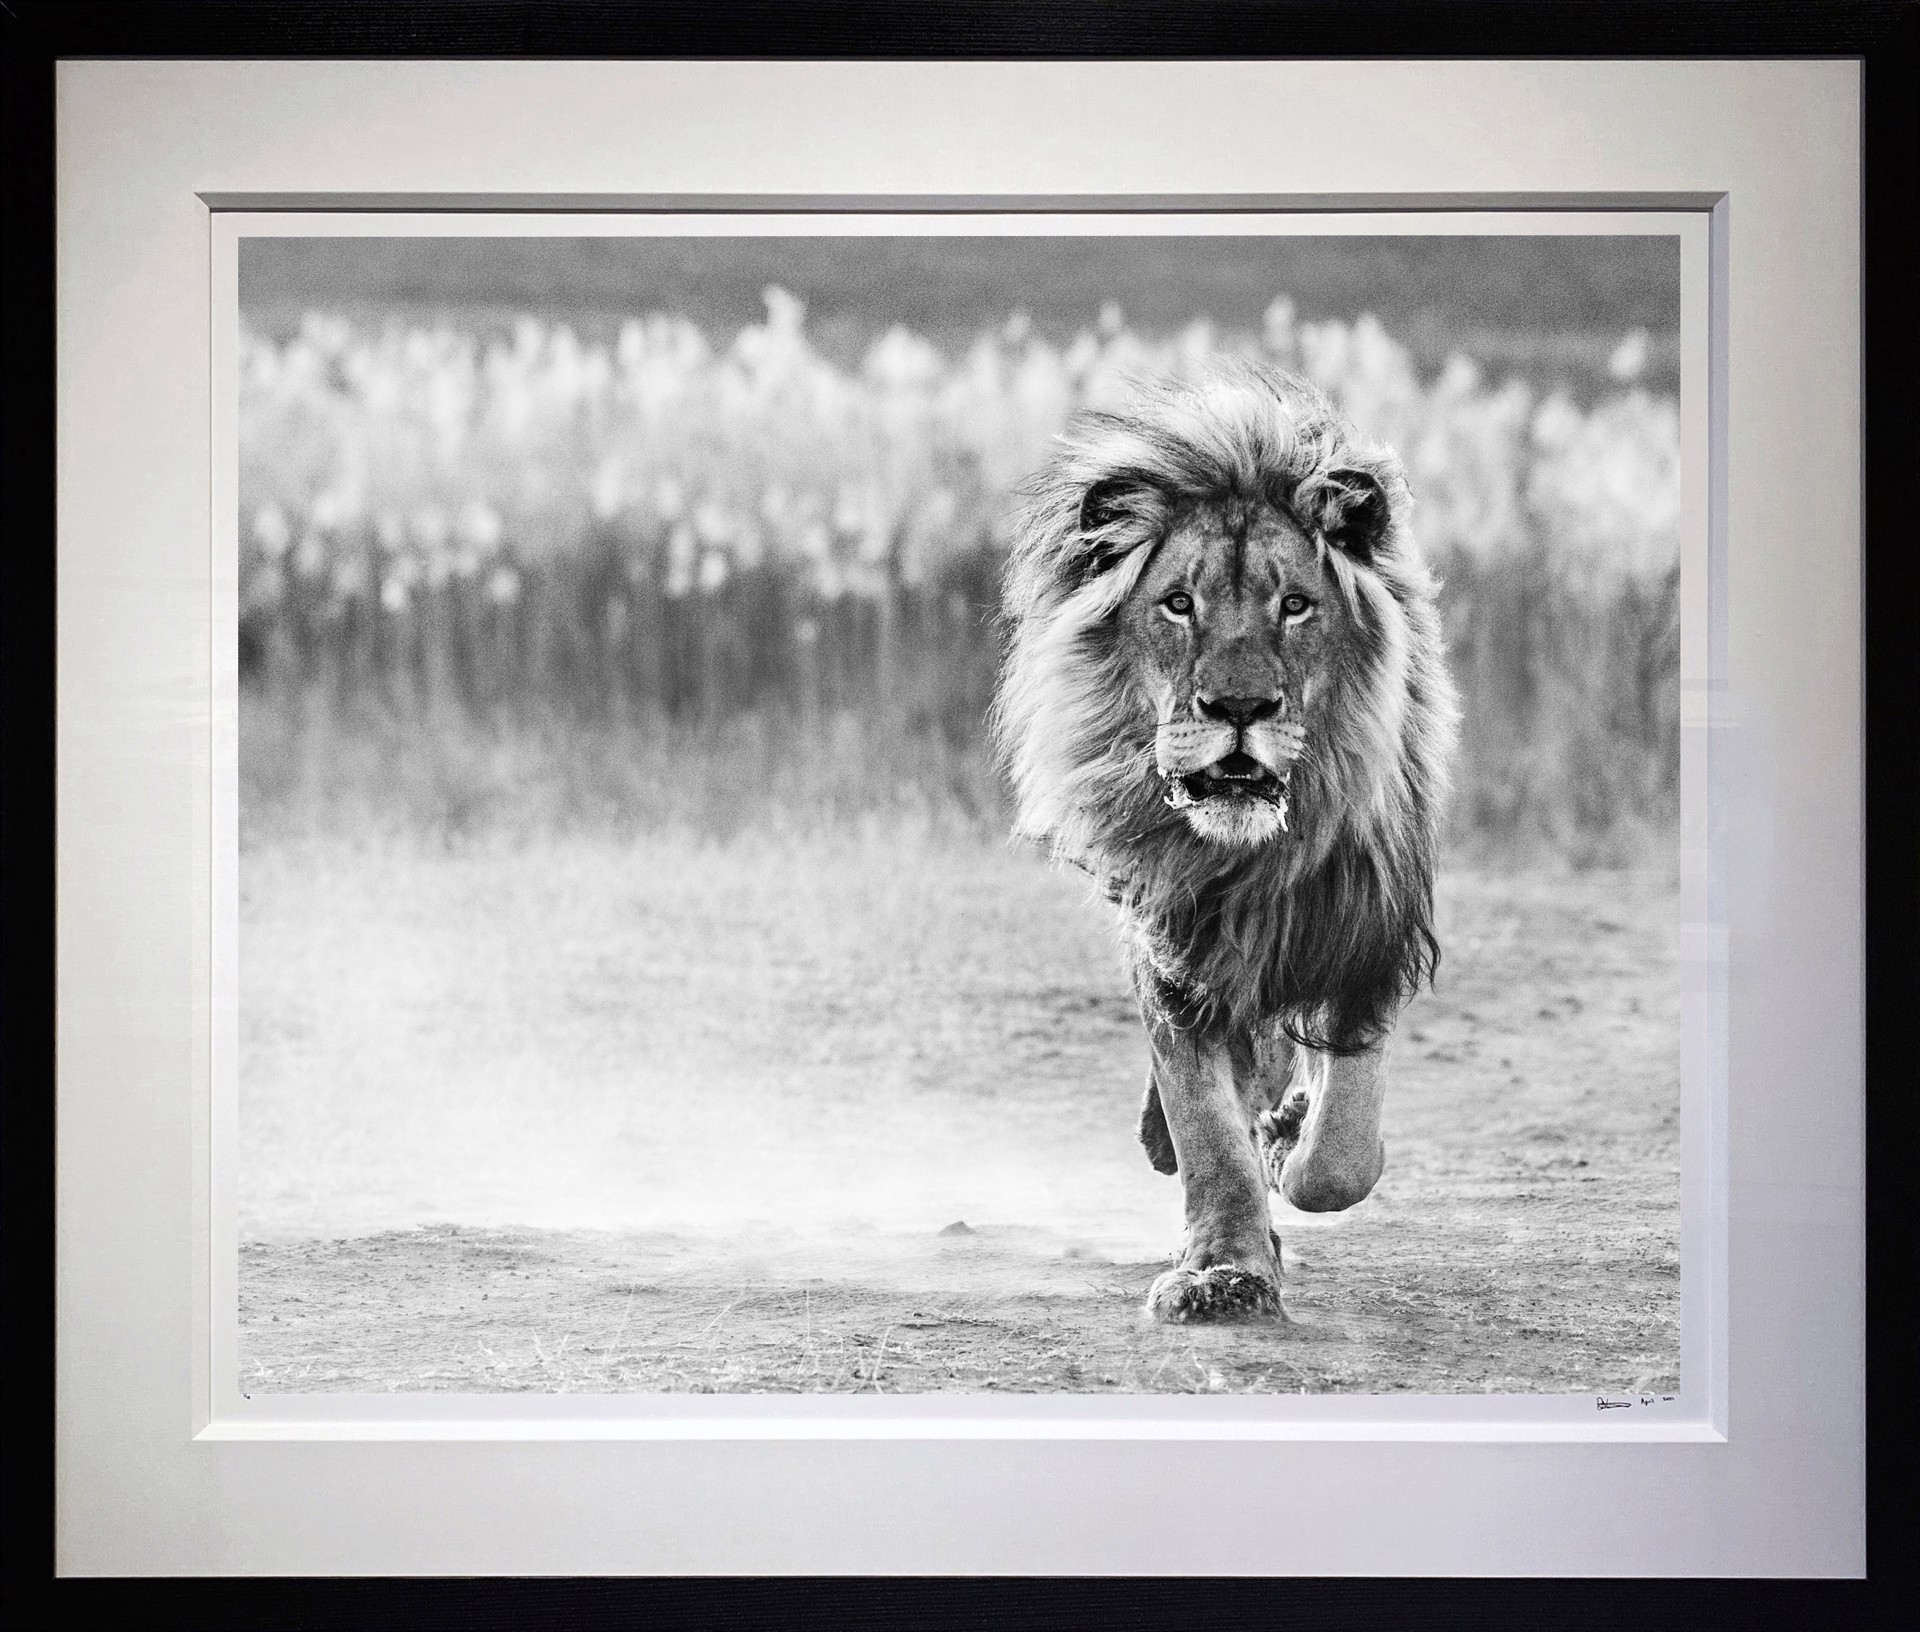 One Foot On The Ground by David Yarrow